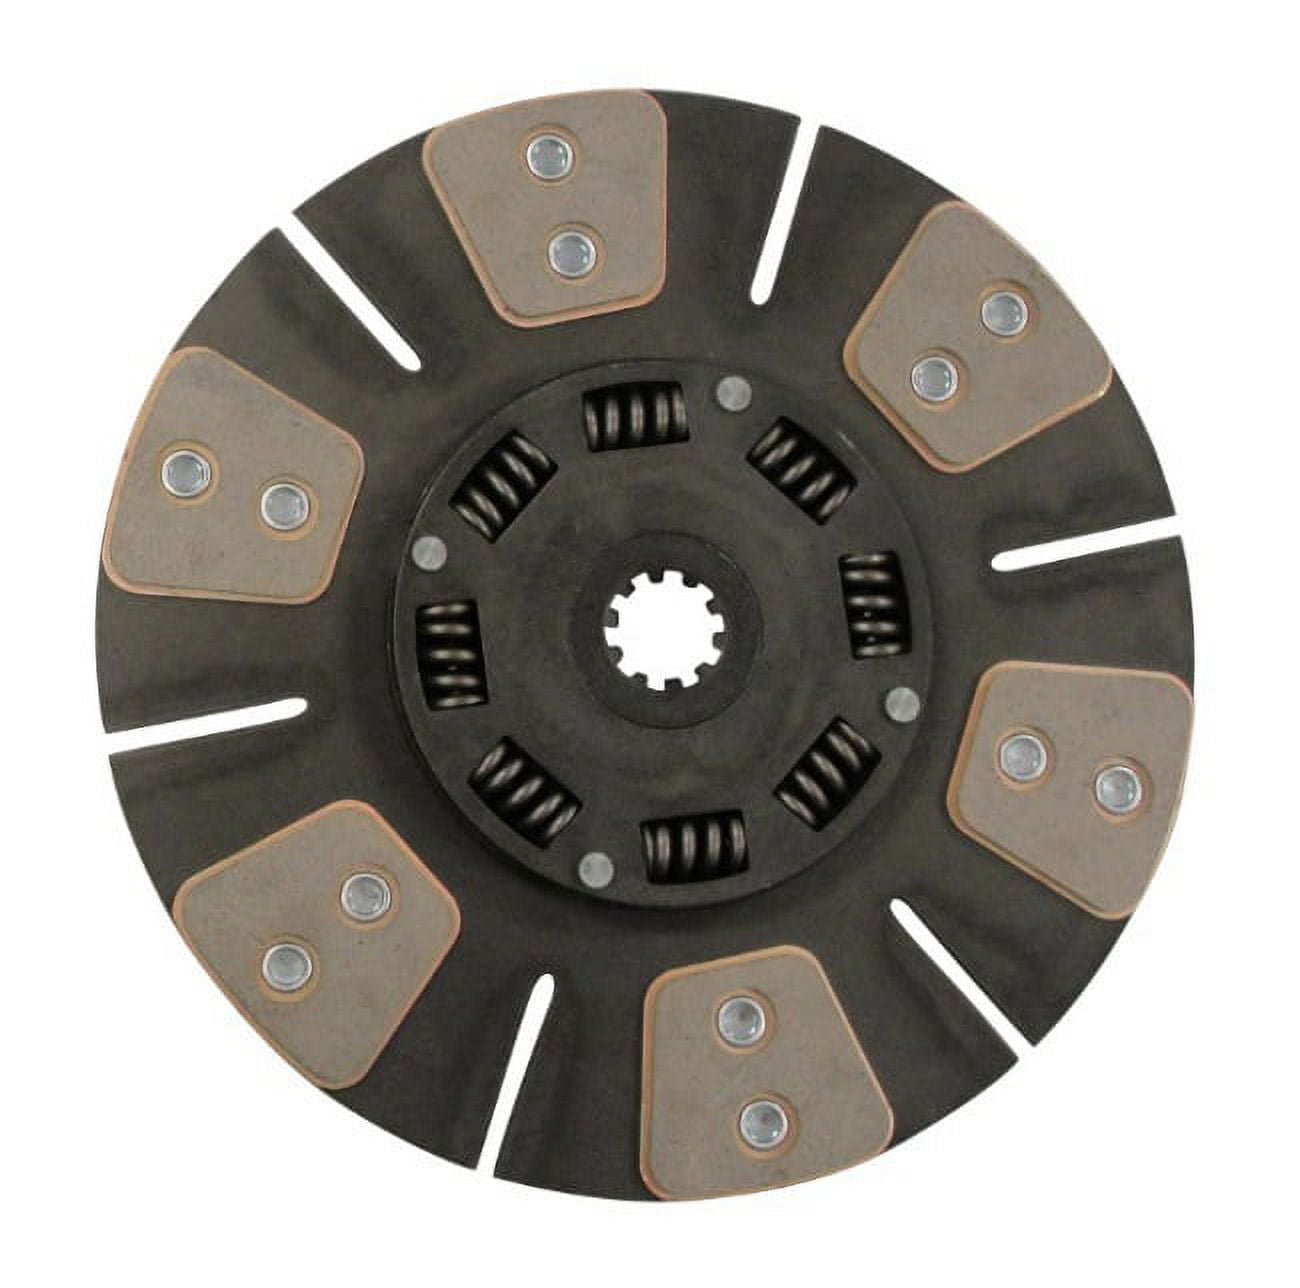 RAParts Clutch Disc Fits Case IH Tractor 454 484 574 584 784 464 684 674  595 495